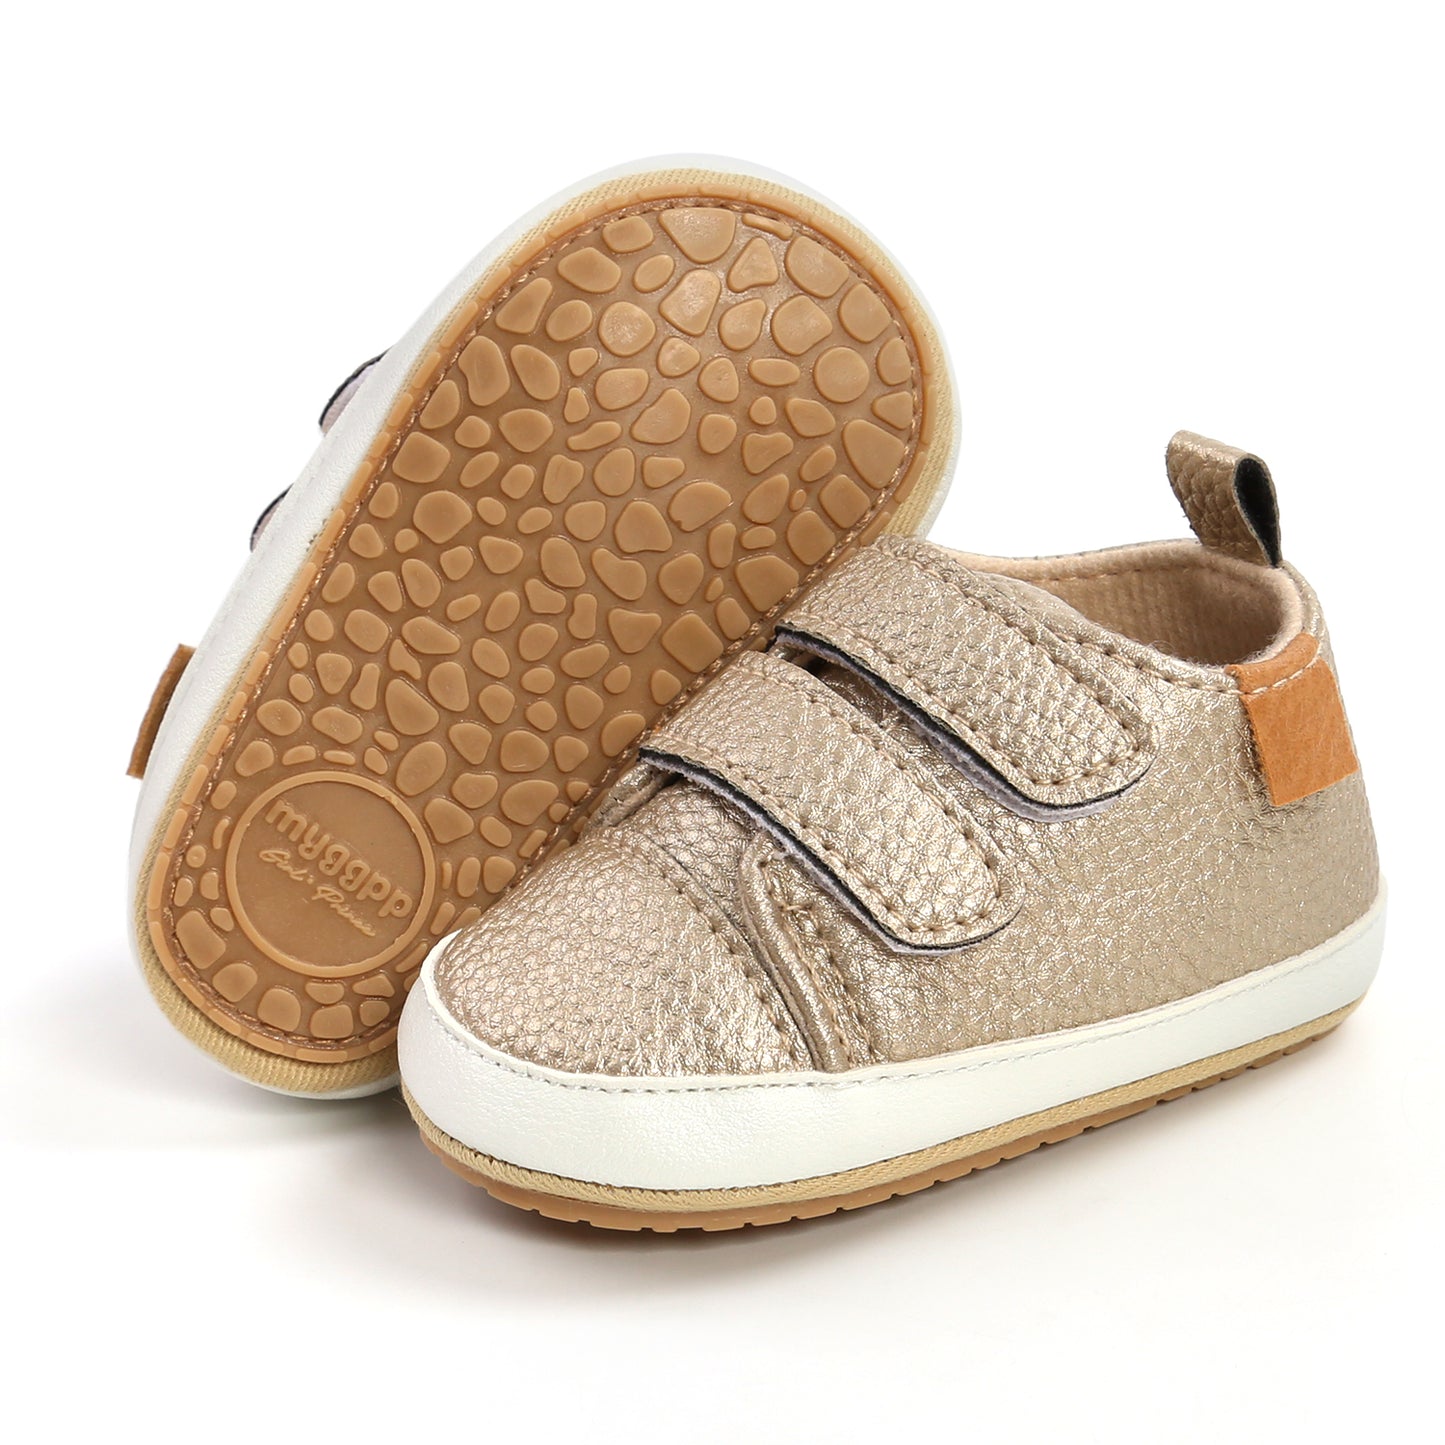 Non-Slip High-Top PU Leather Walking Shoes for Baby Boys and Girls